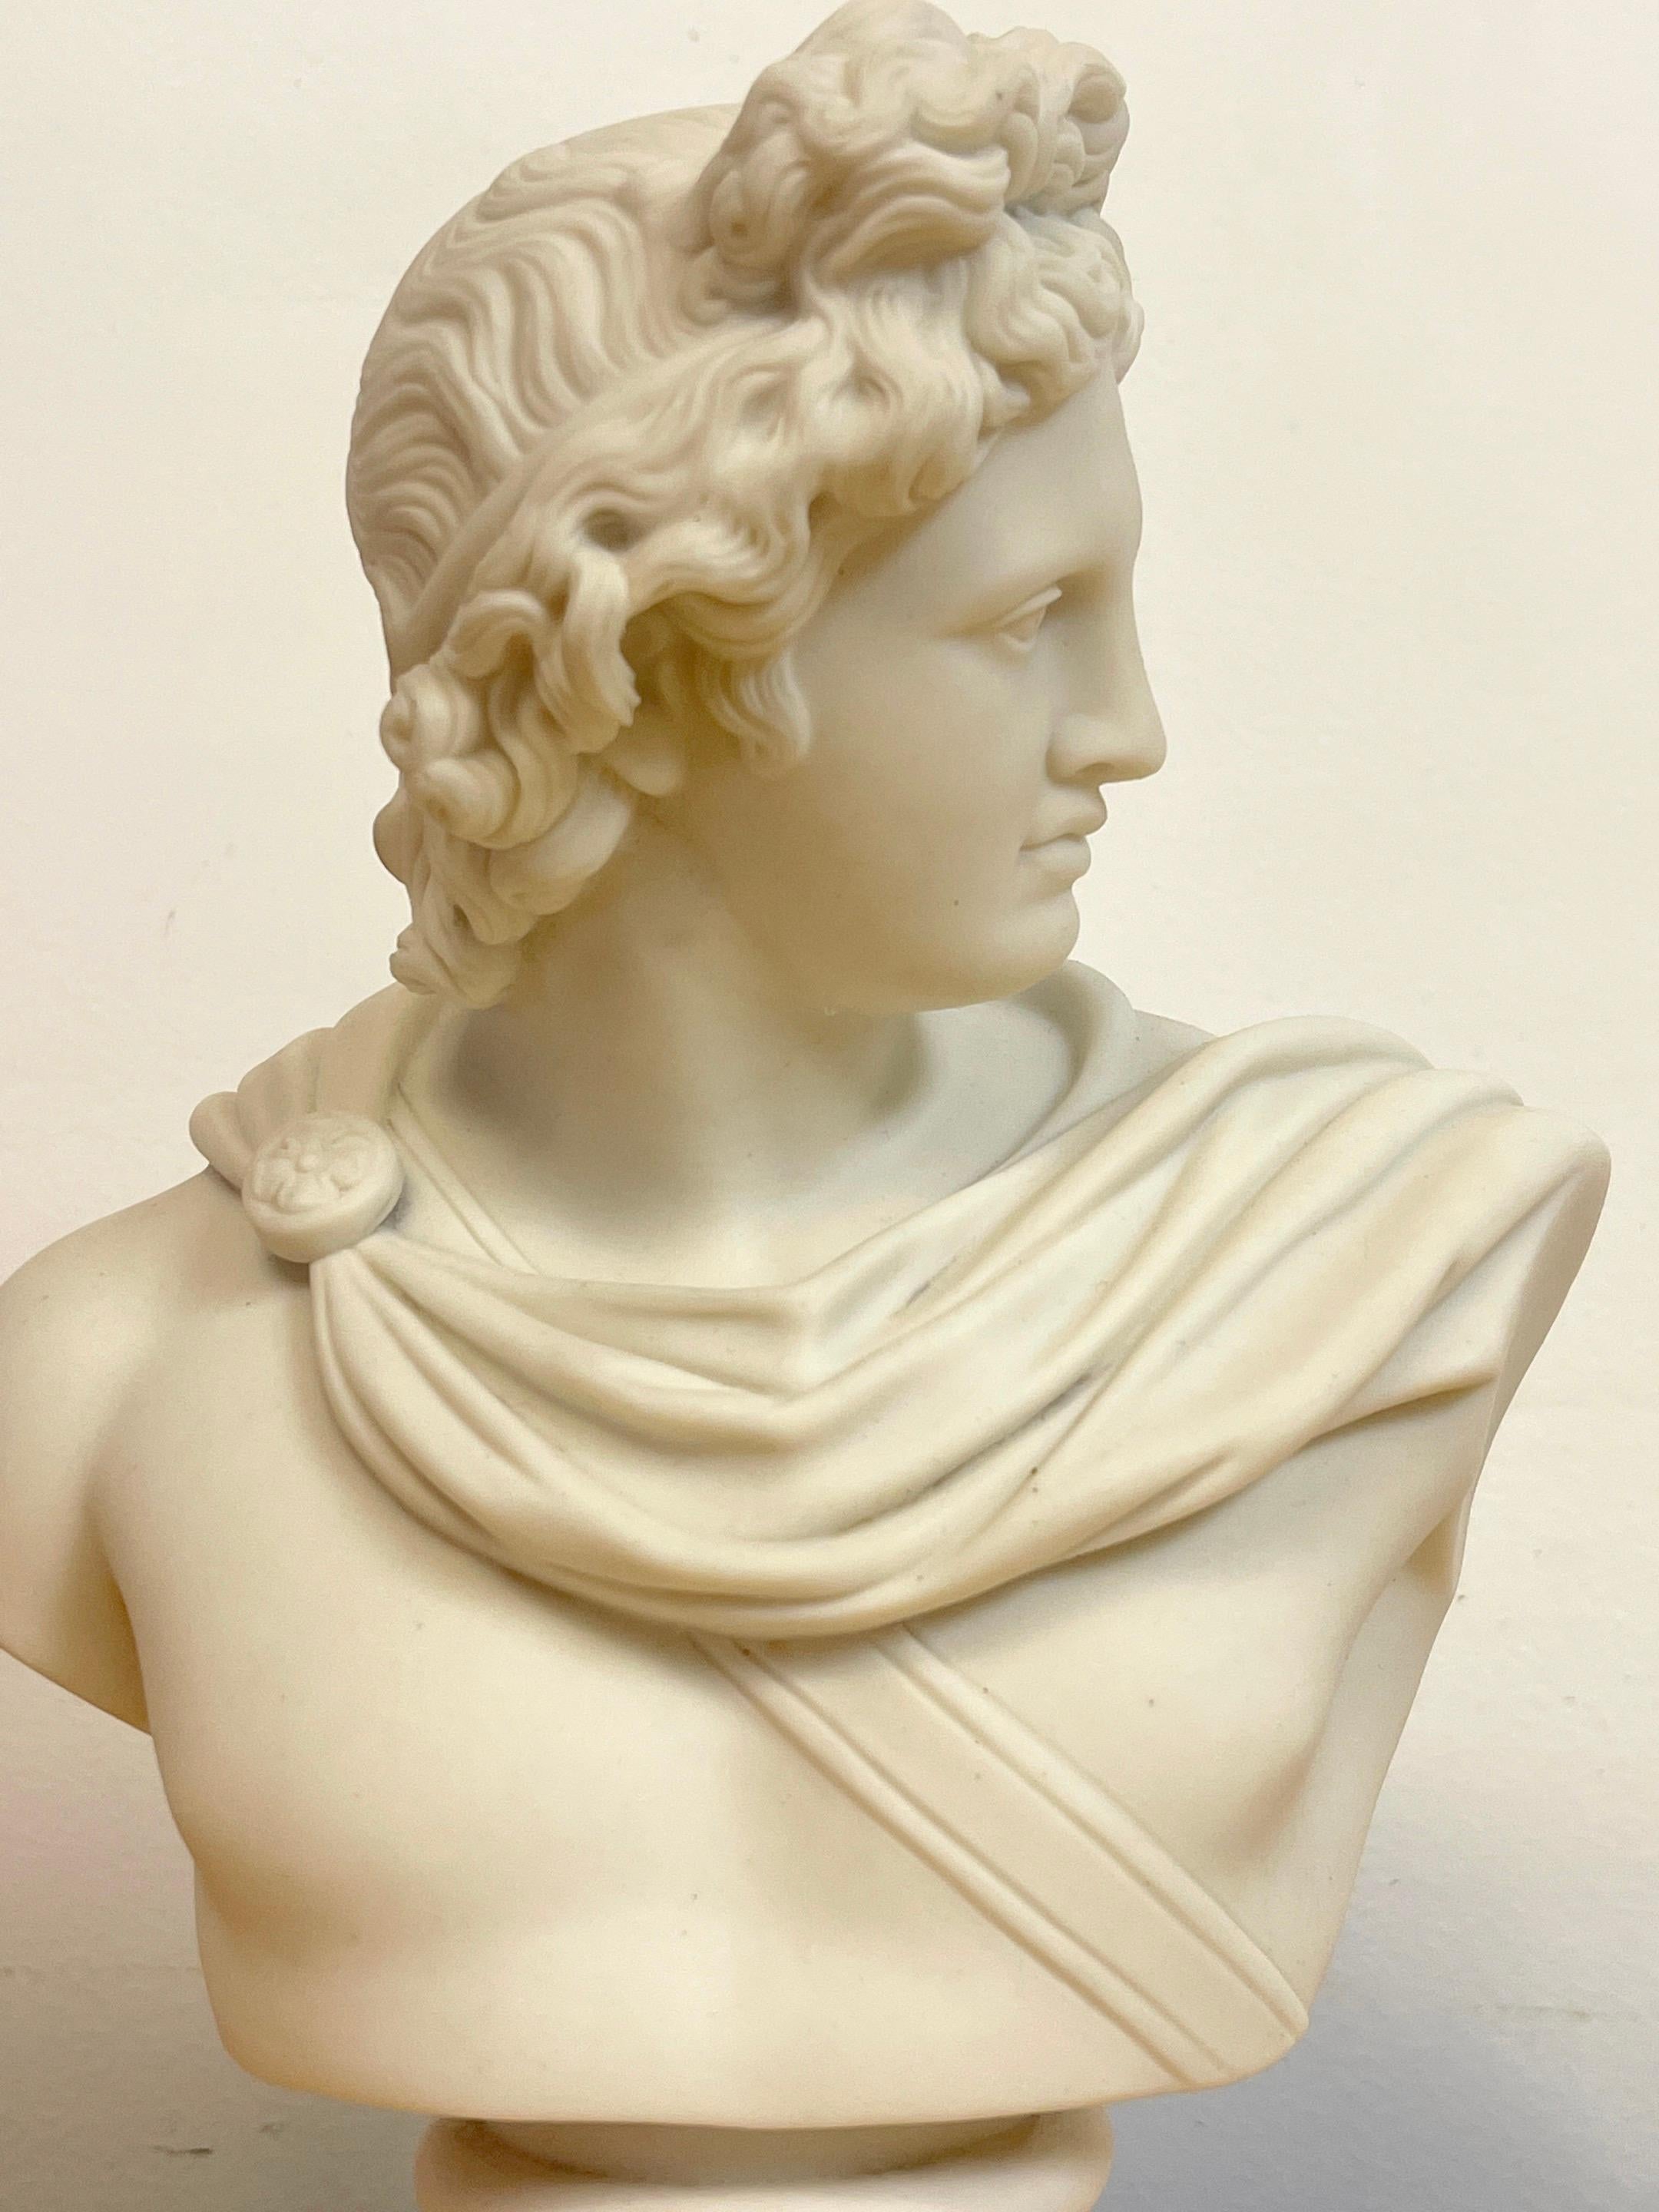 19th Century English Diminutive Parian Bust of Apollo Belvedere In Good Condition For Sale In West Palm Beach, FL